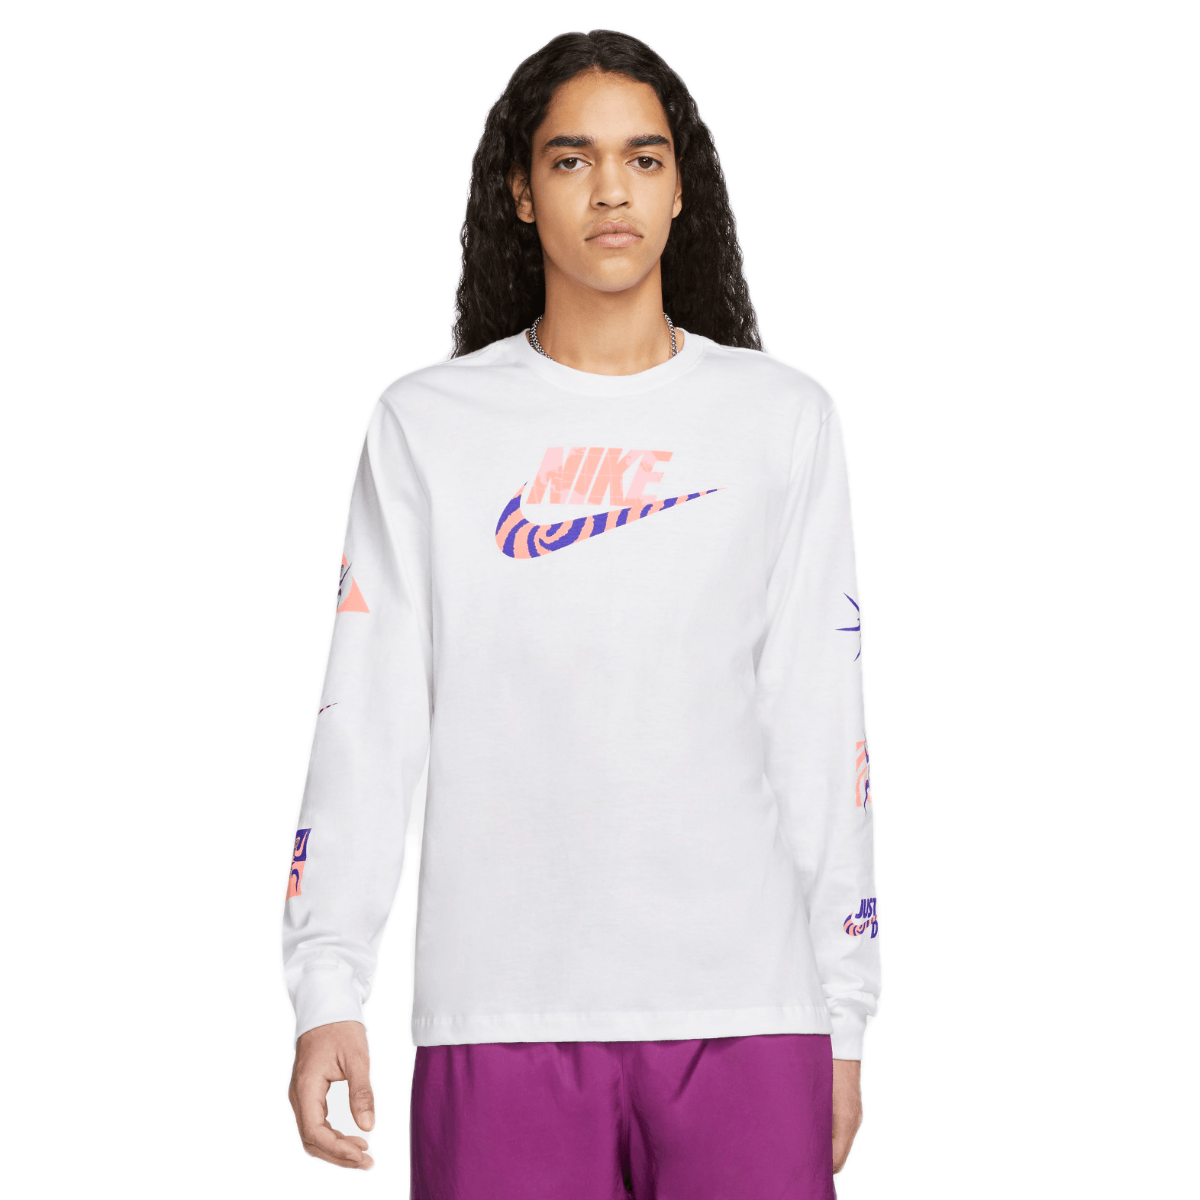 NIKE NSW Hyper Femme Cropped T-Shirt White Pink Blue Size Large